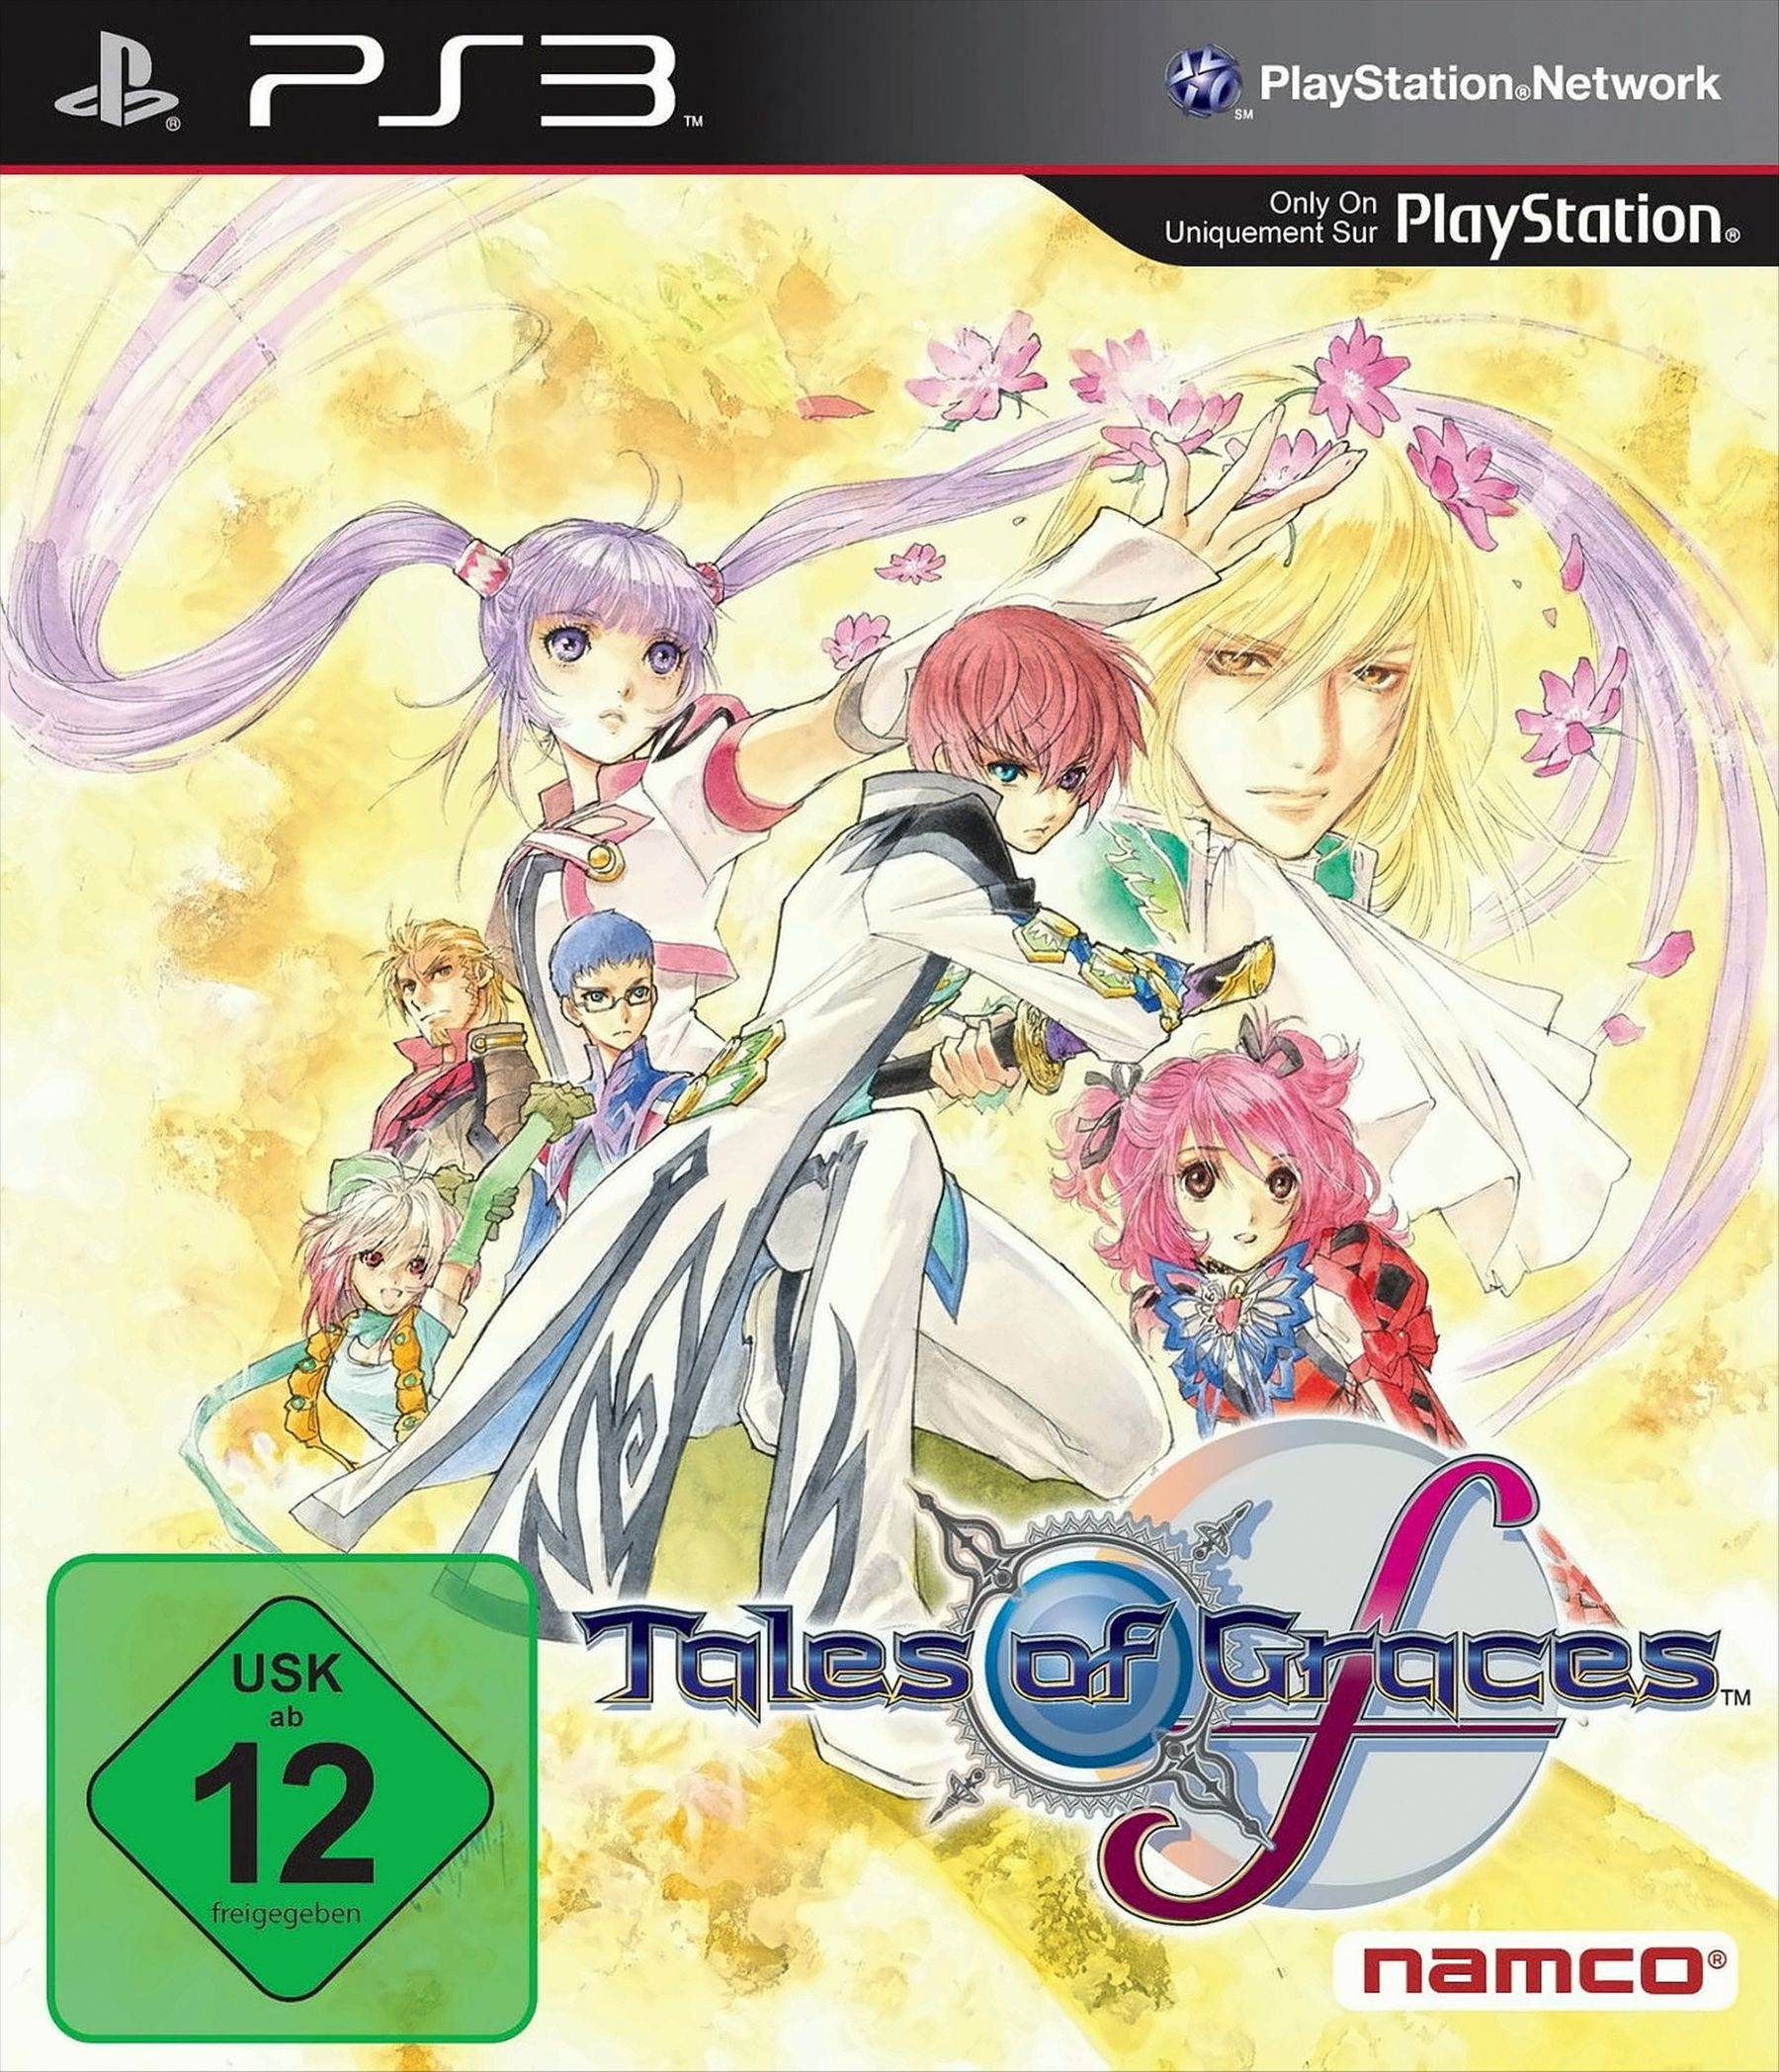 Tales F - - 3] Graces Relaunch Of [PlayStation